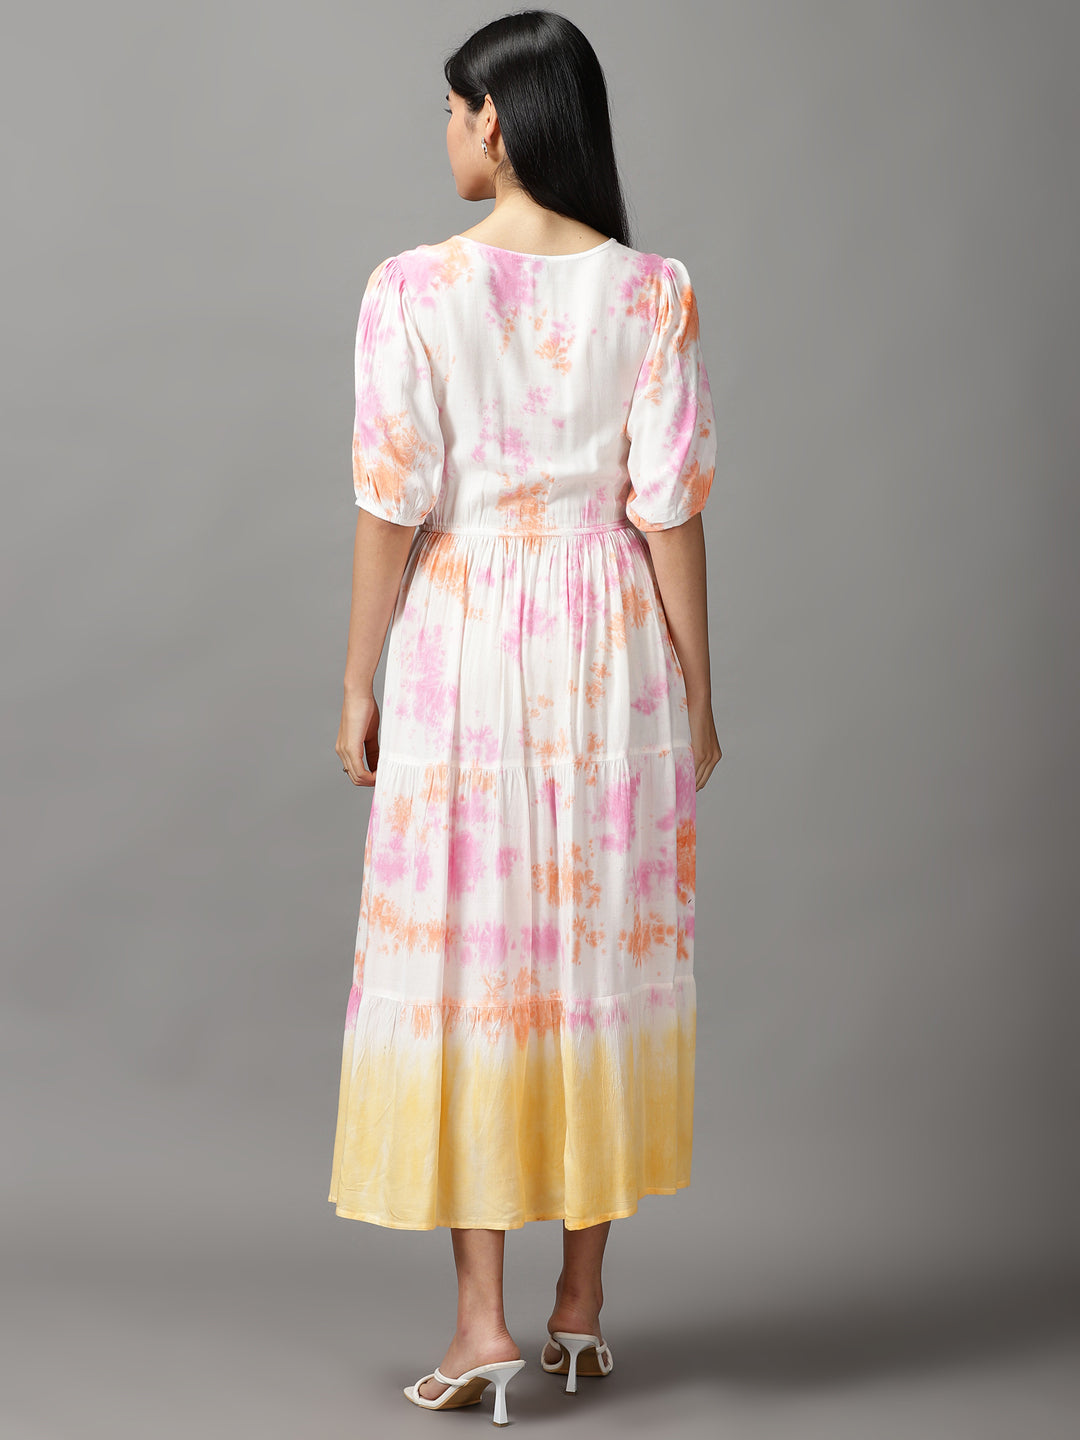 Women's White Tie Dye Fit and Flare Dress